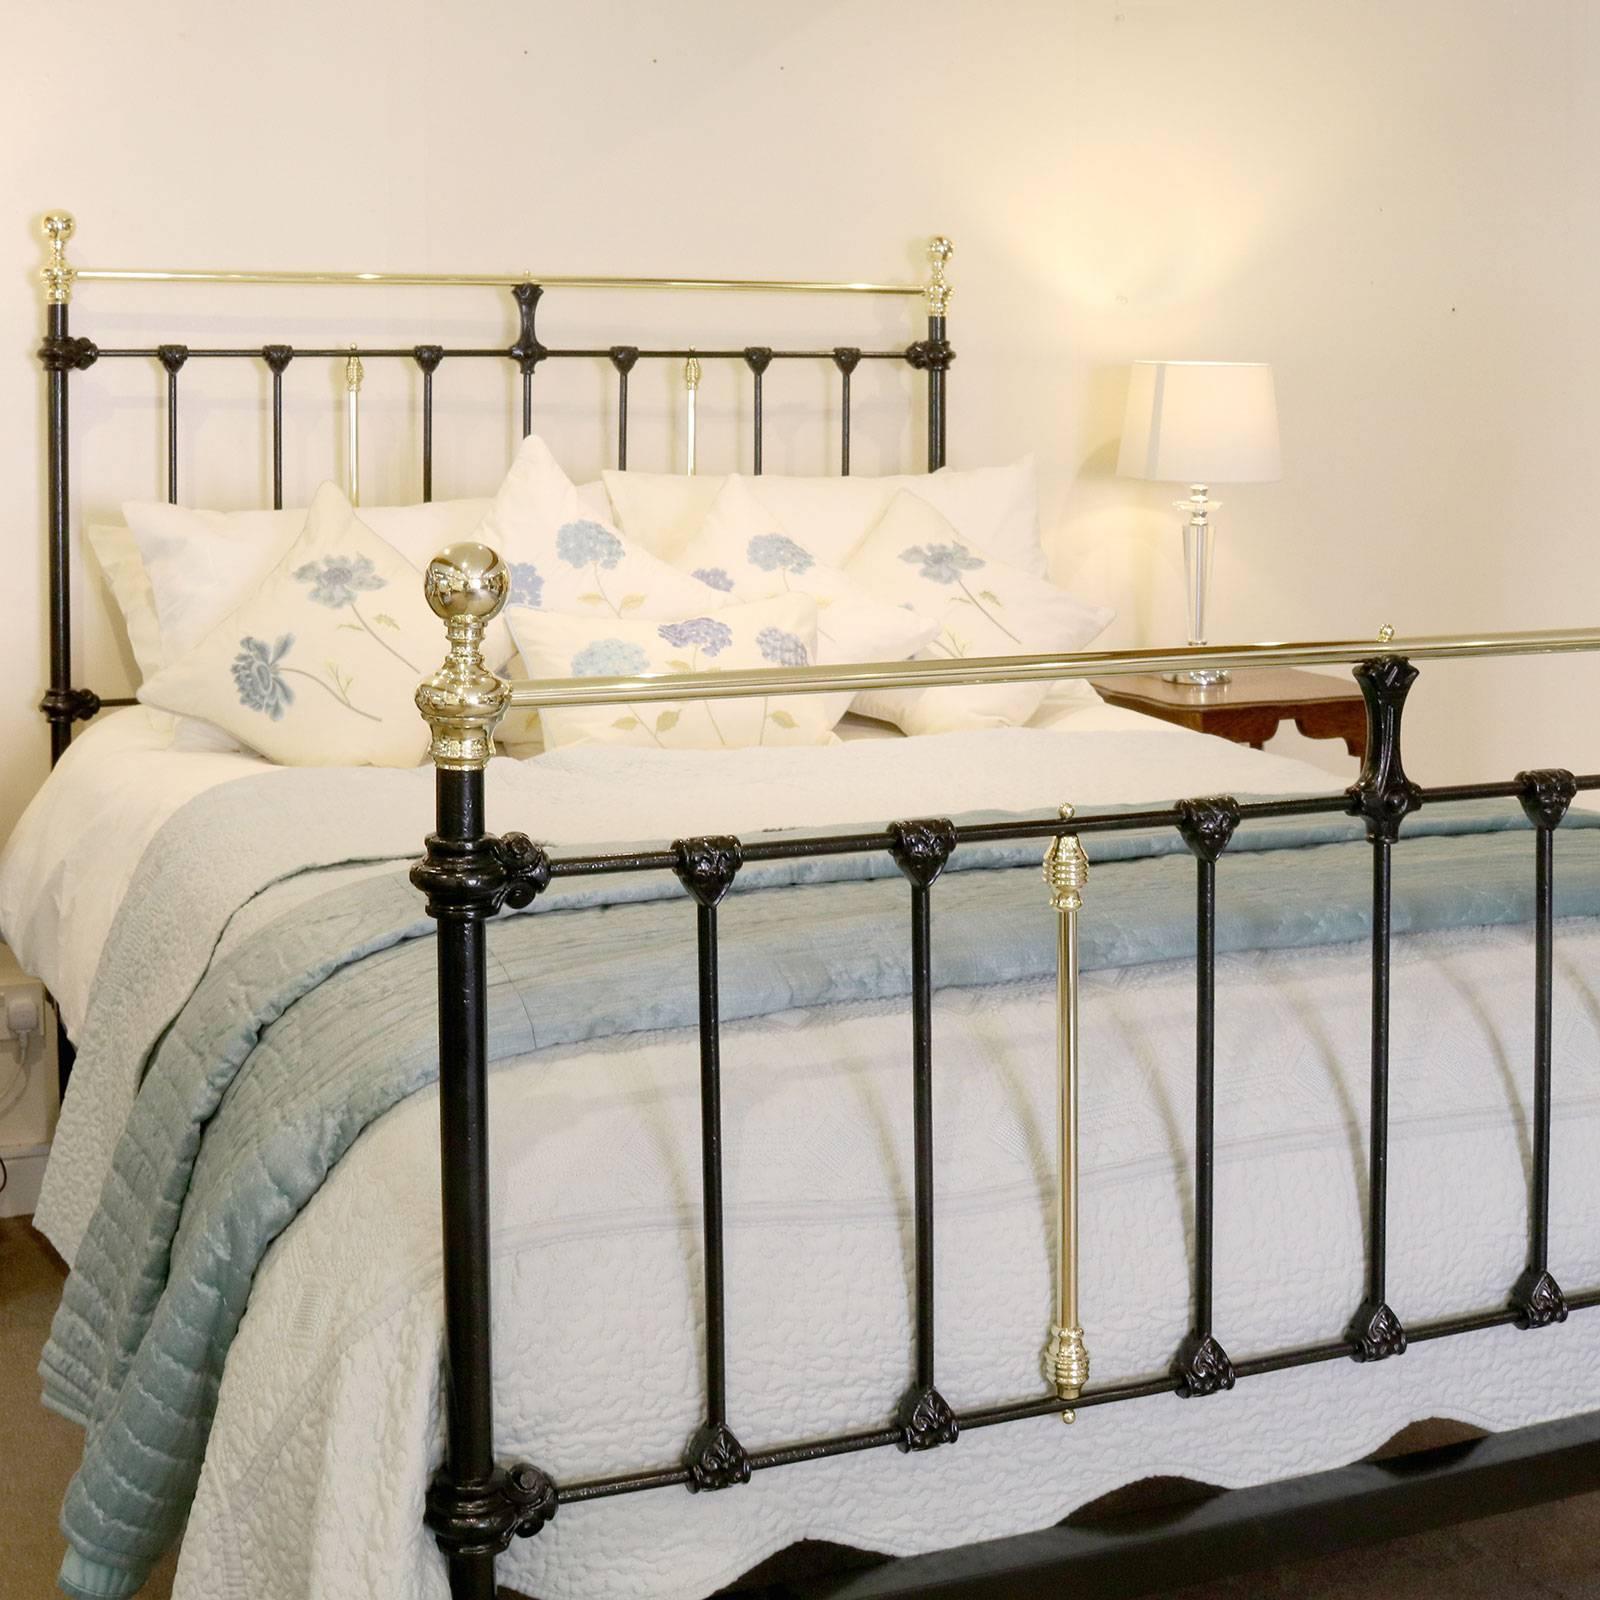 Late 19th Century Brass and Iron Bed in Black, MK113